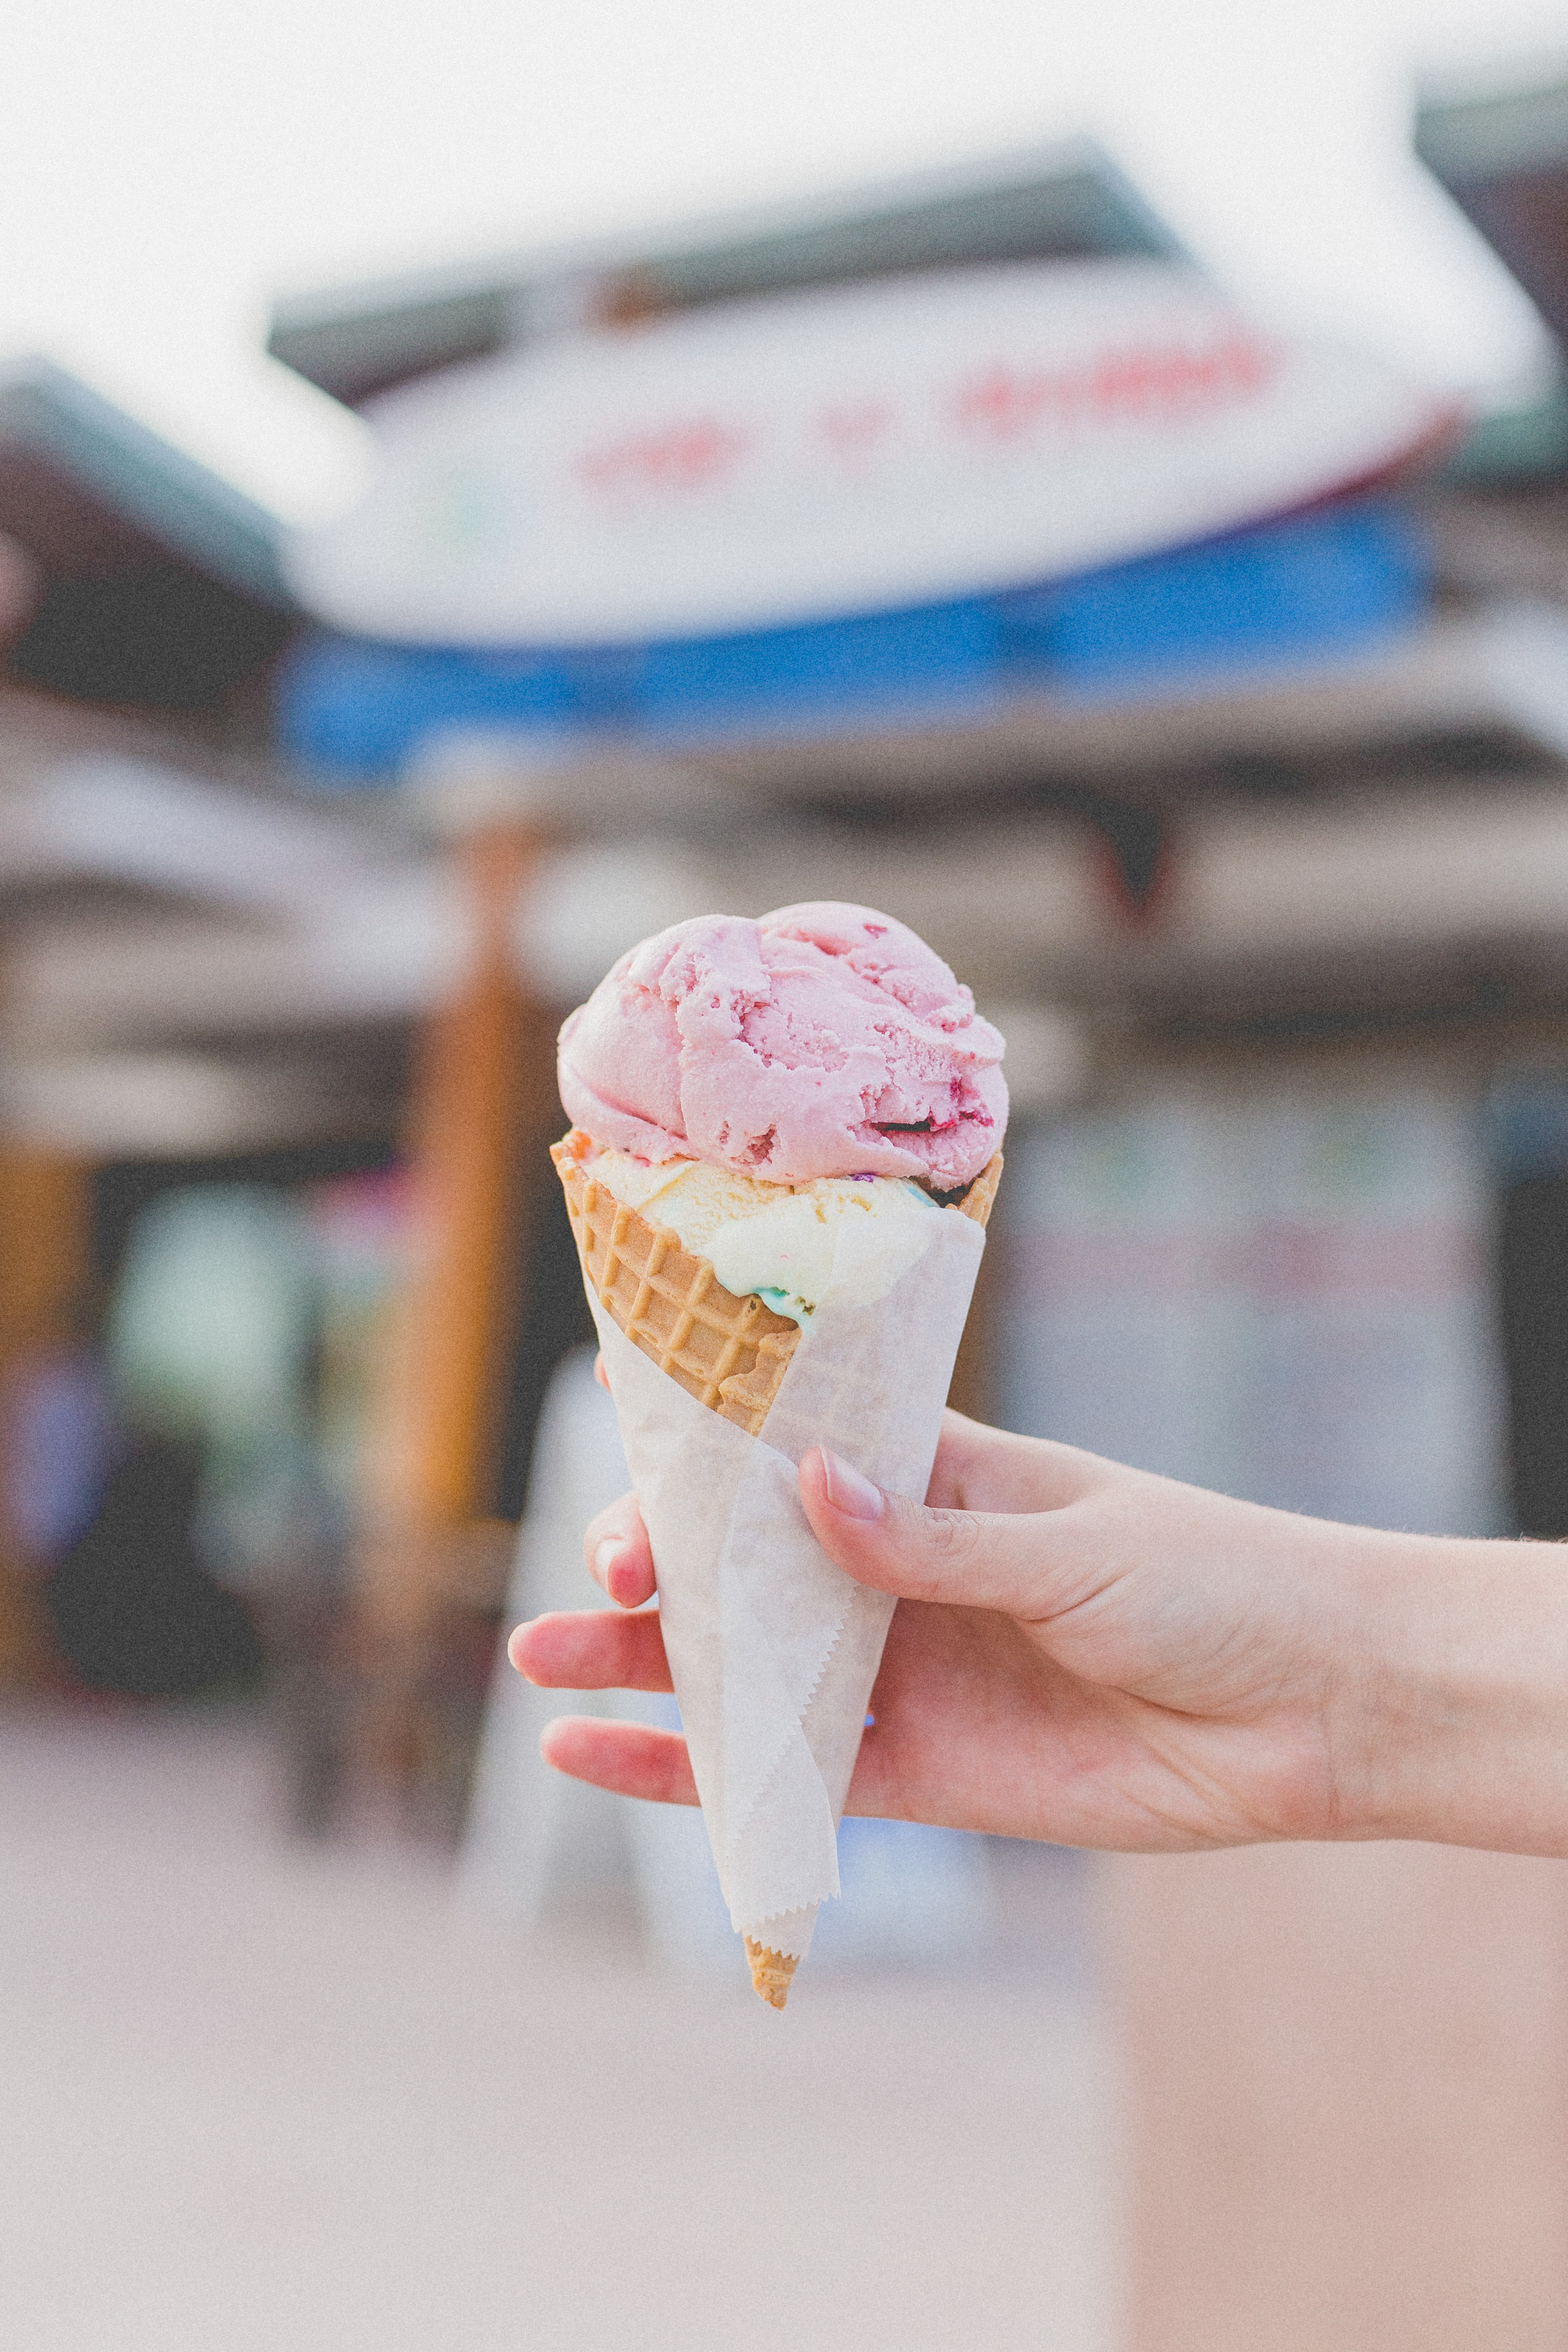 ice cream cone being held in a hand. showing how a lack of willpower isn't the problem